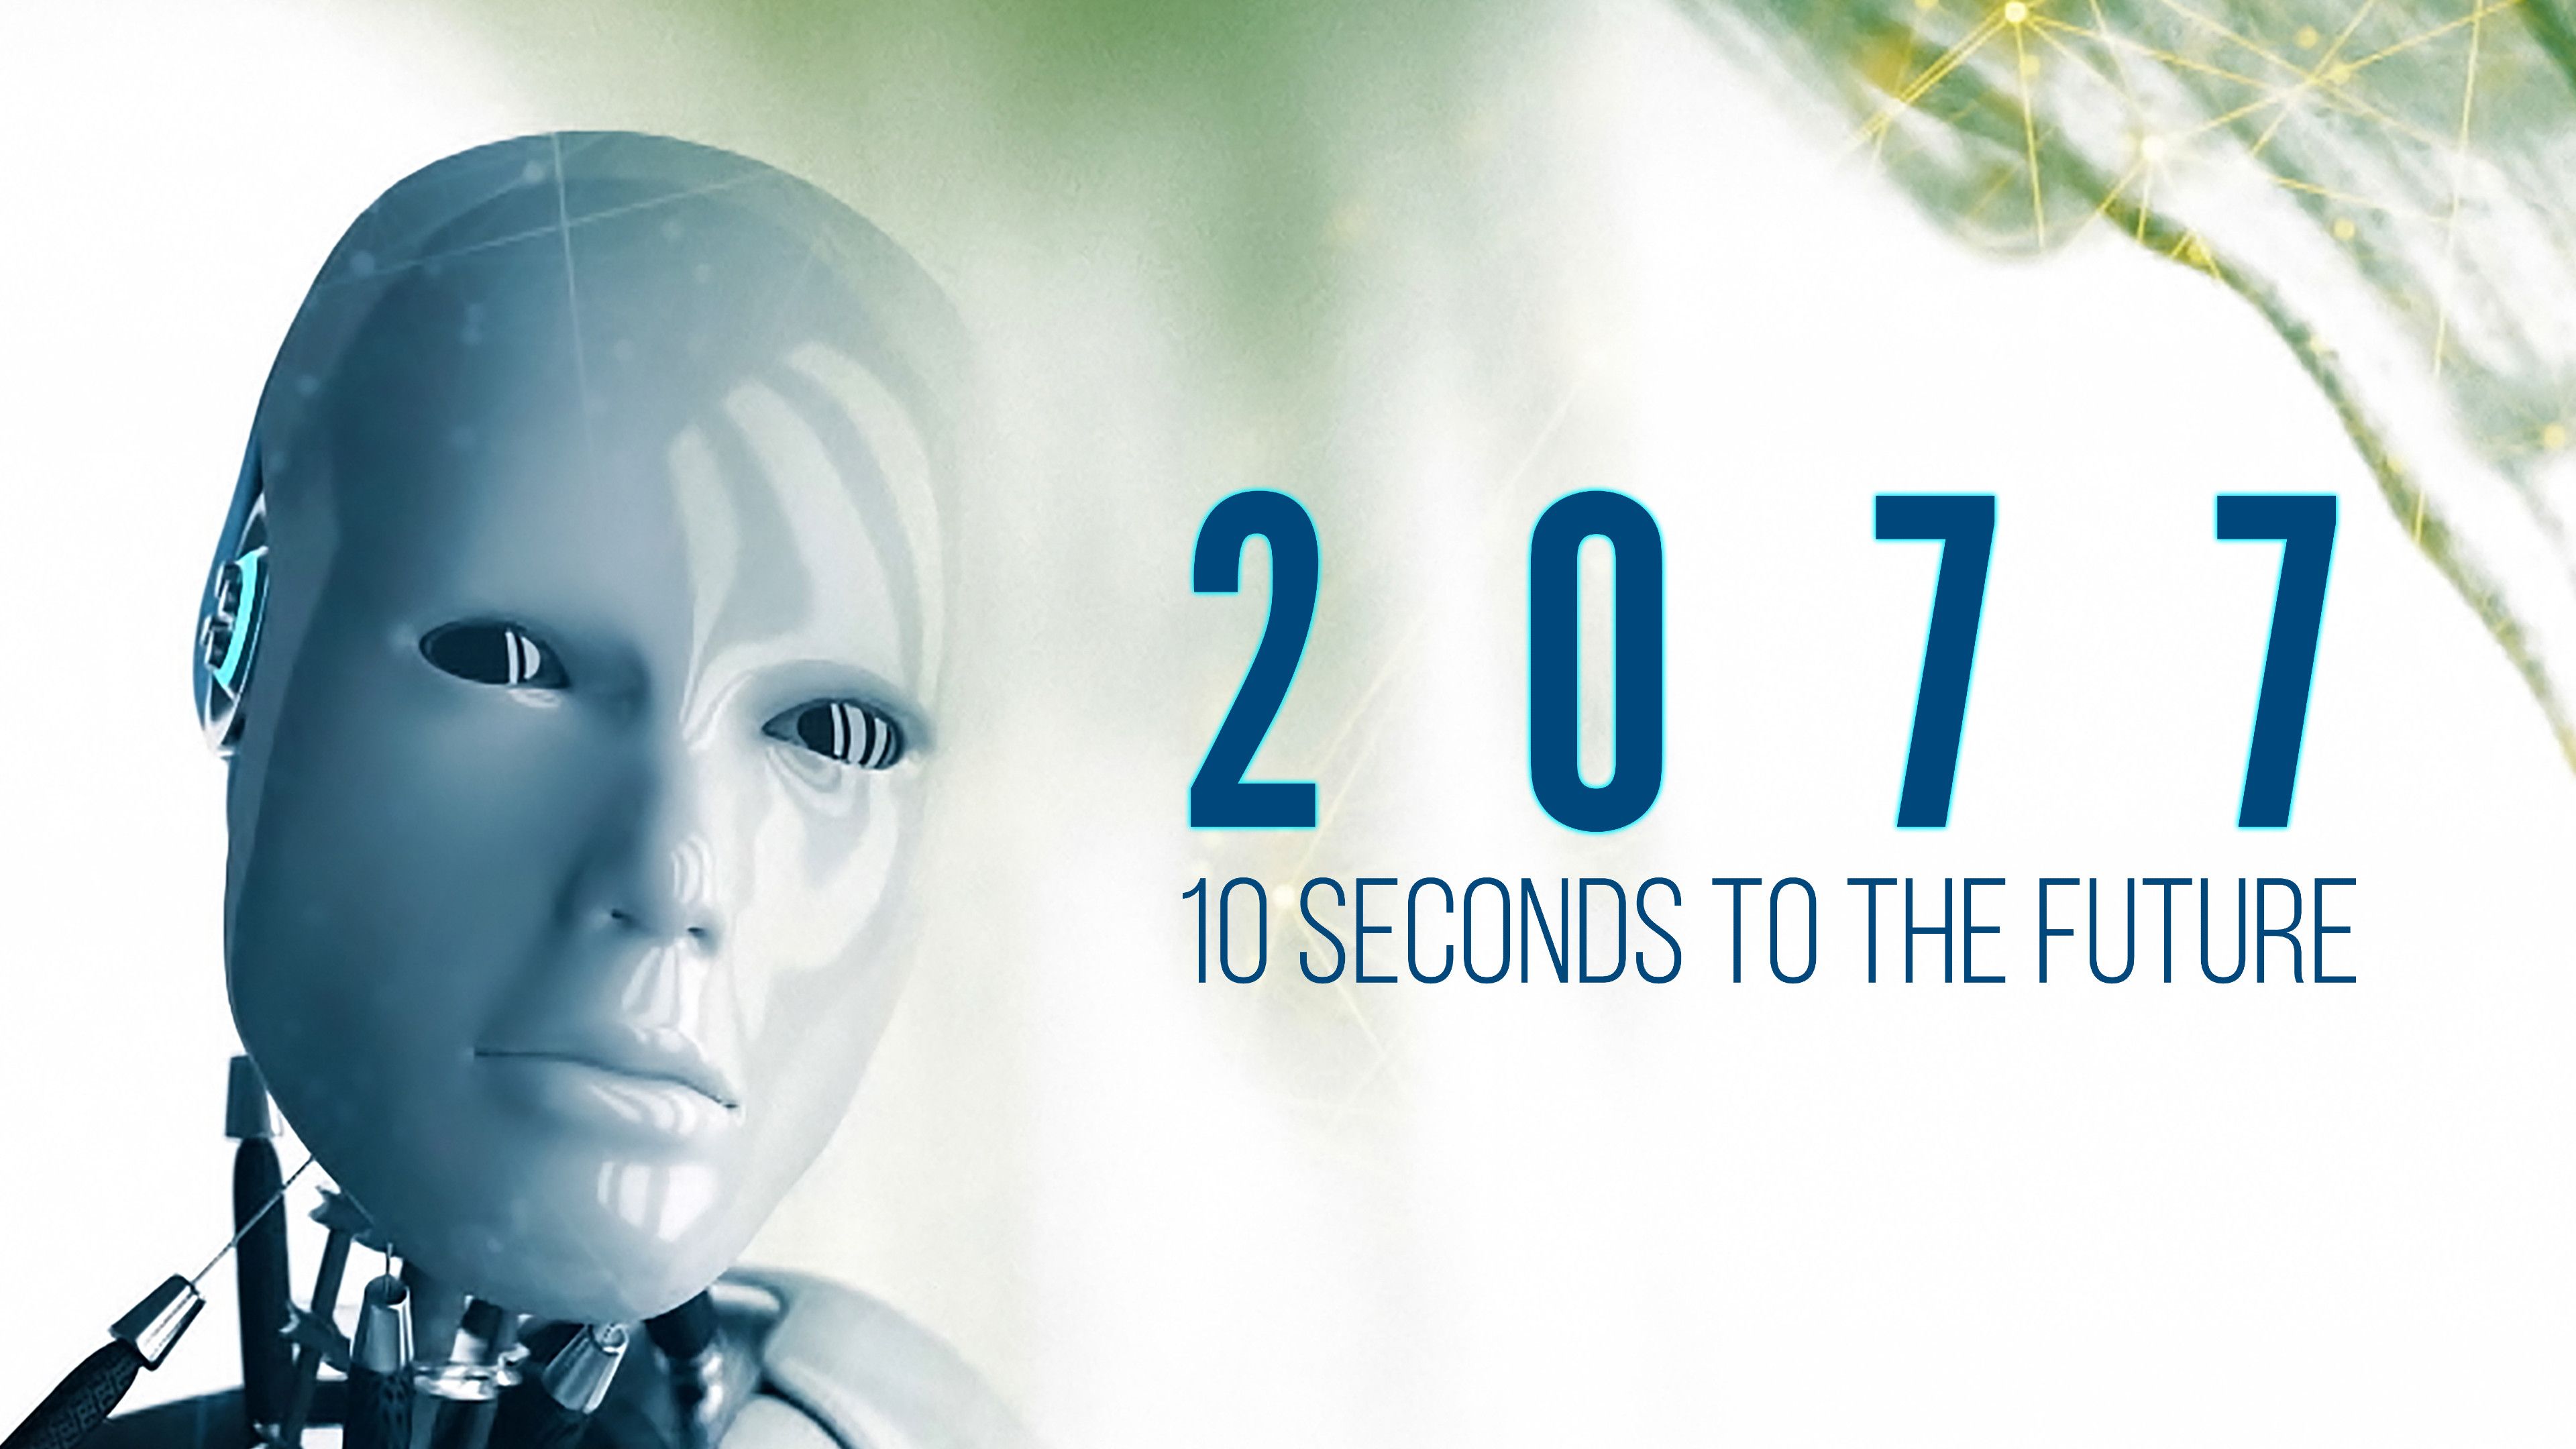 2077 - 10 SECONDS TO THE FUTURE